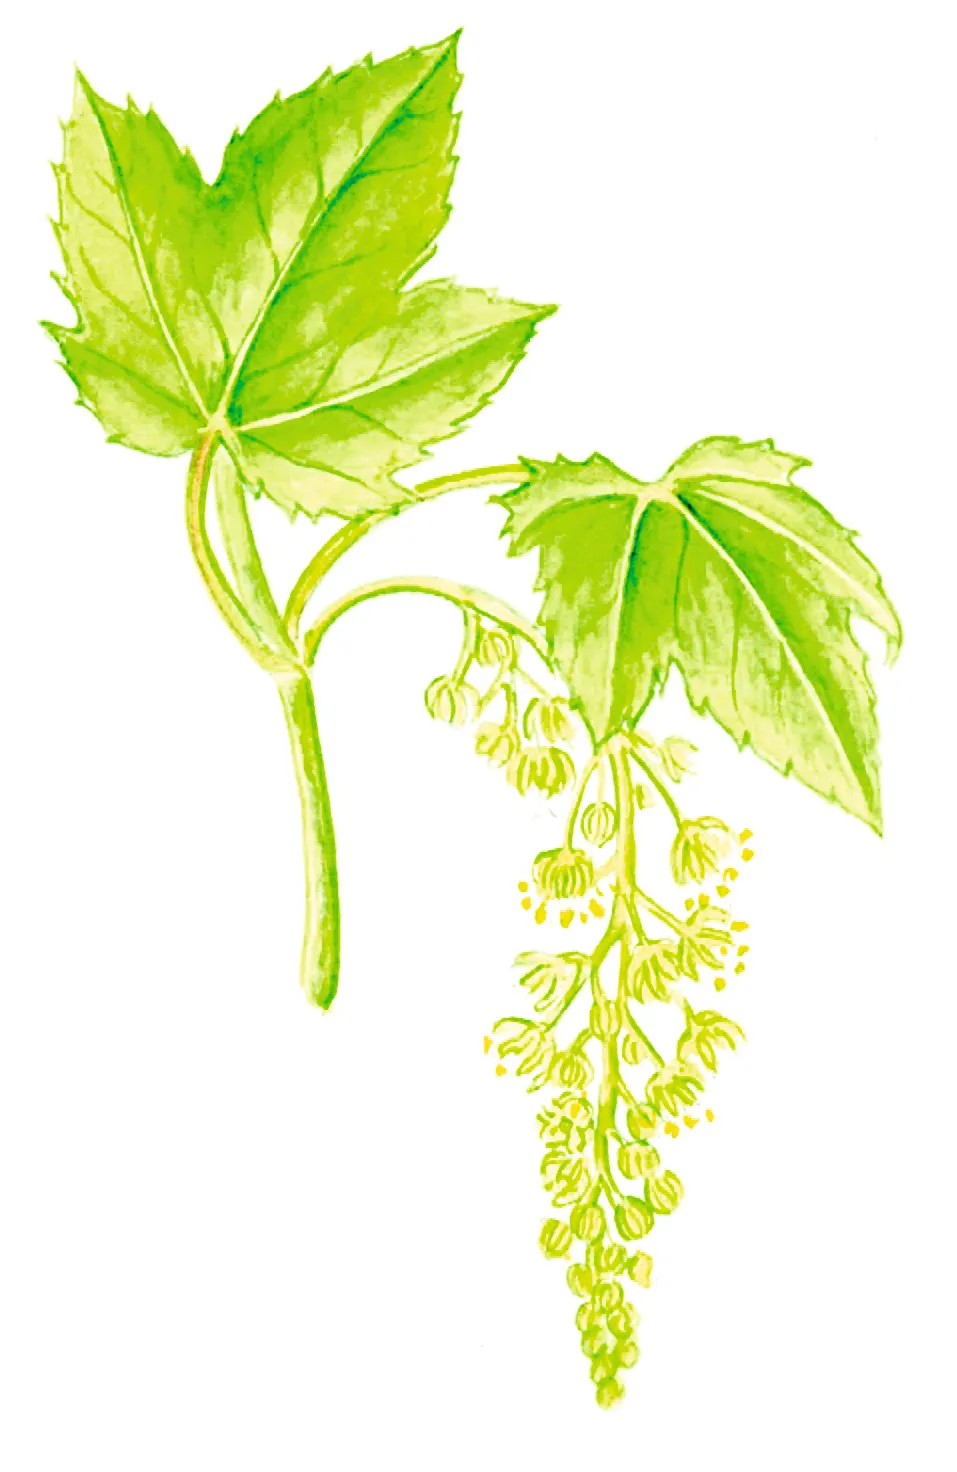 Illustration of sycamore blossom and leaves.